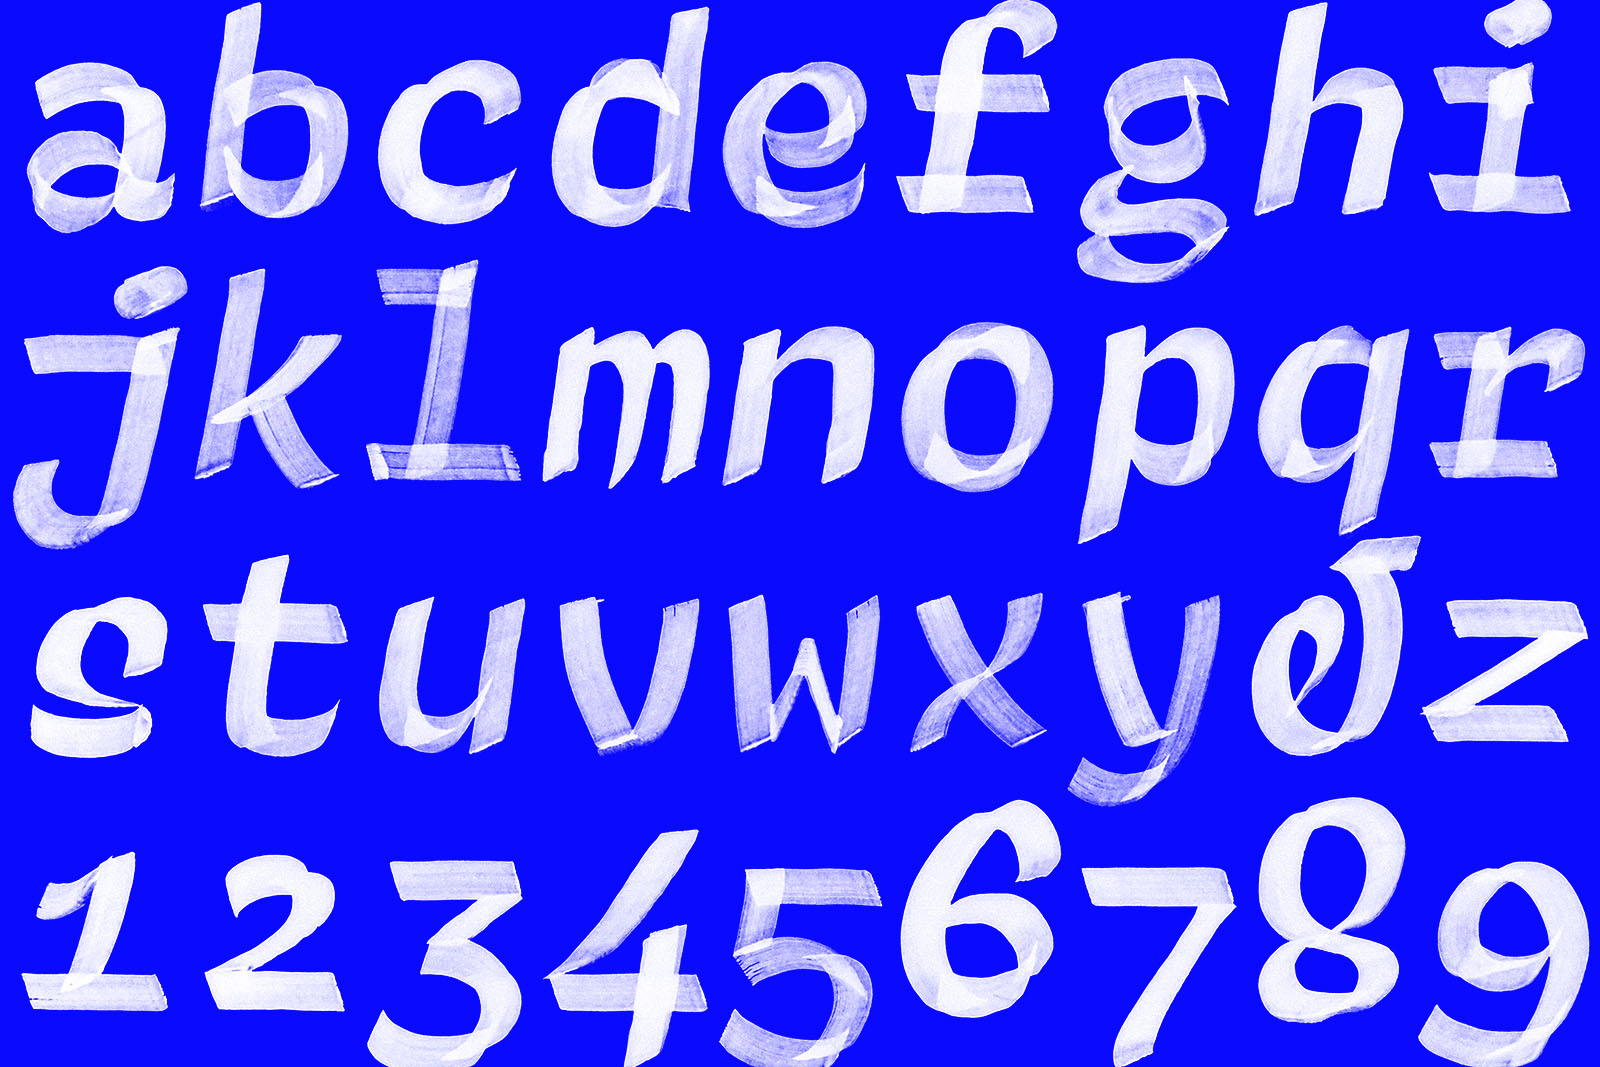 Brush-painted letters showing the construction logic of Recursive